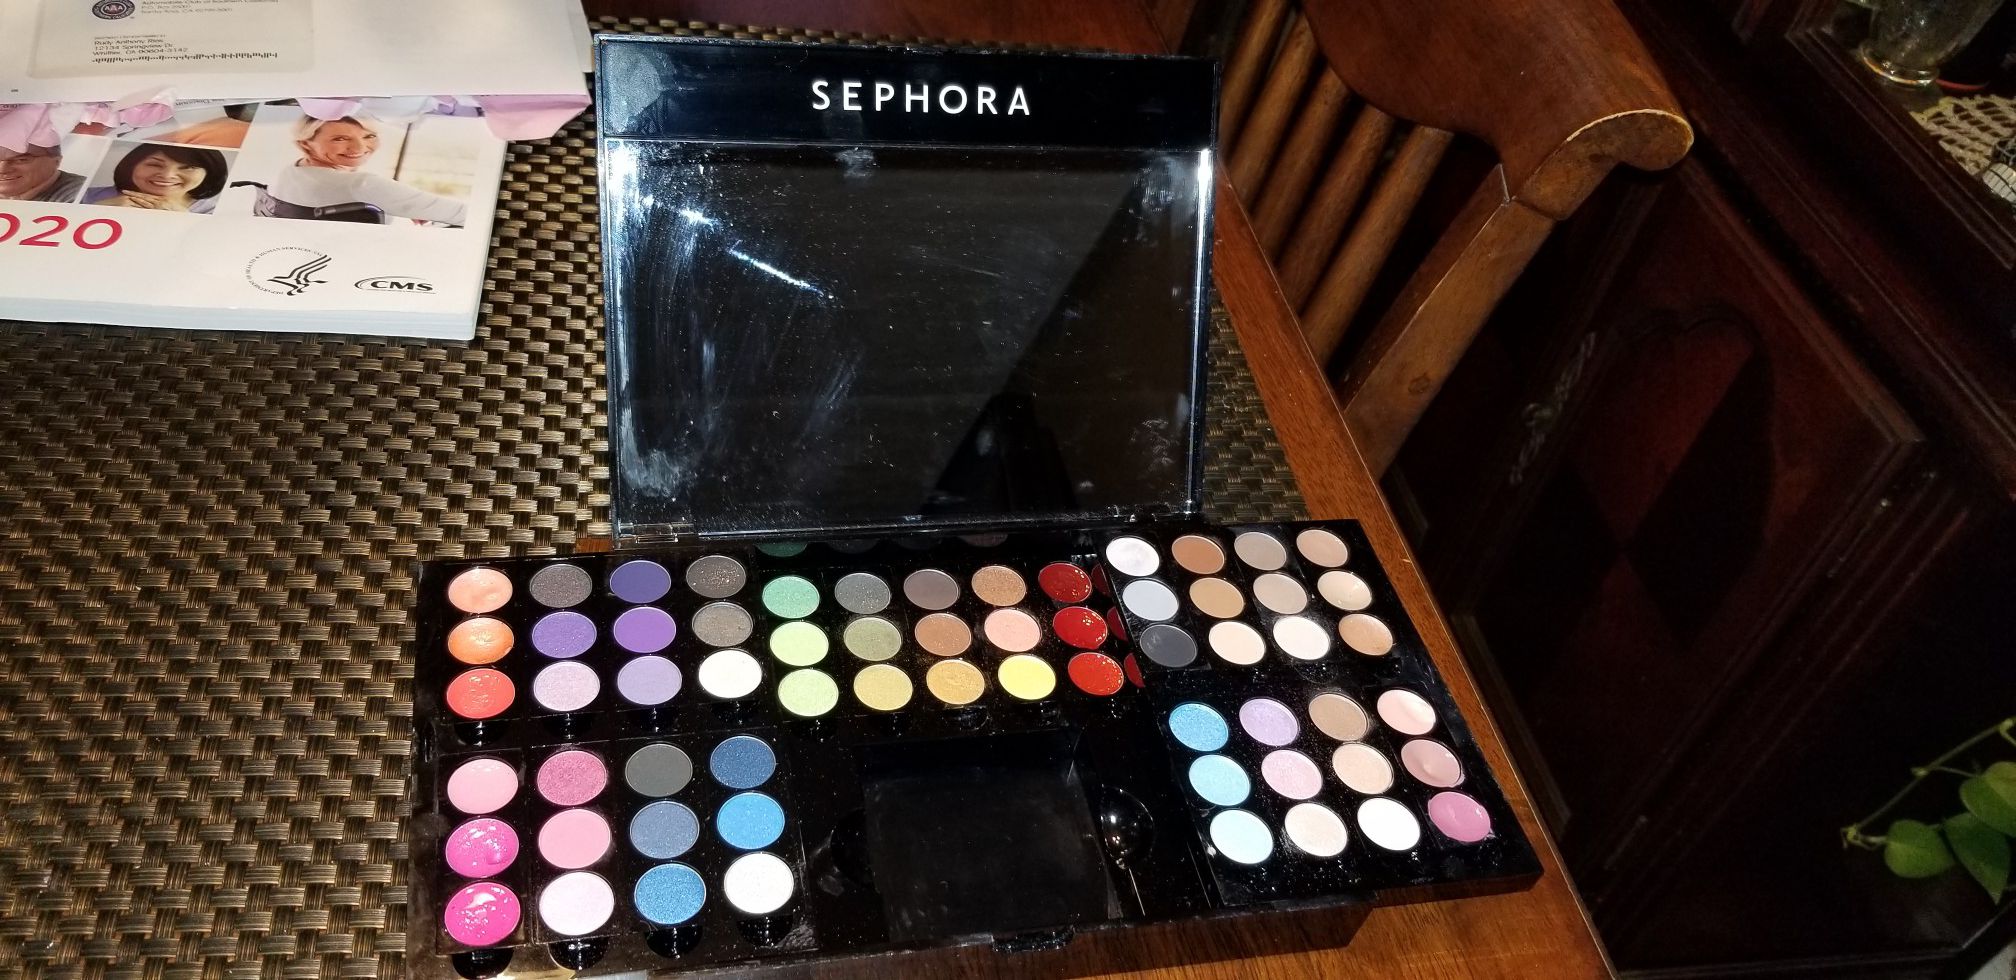 Sephora makeup kit brushes not included